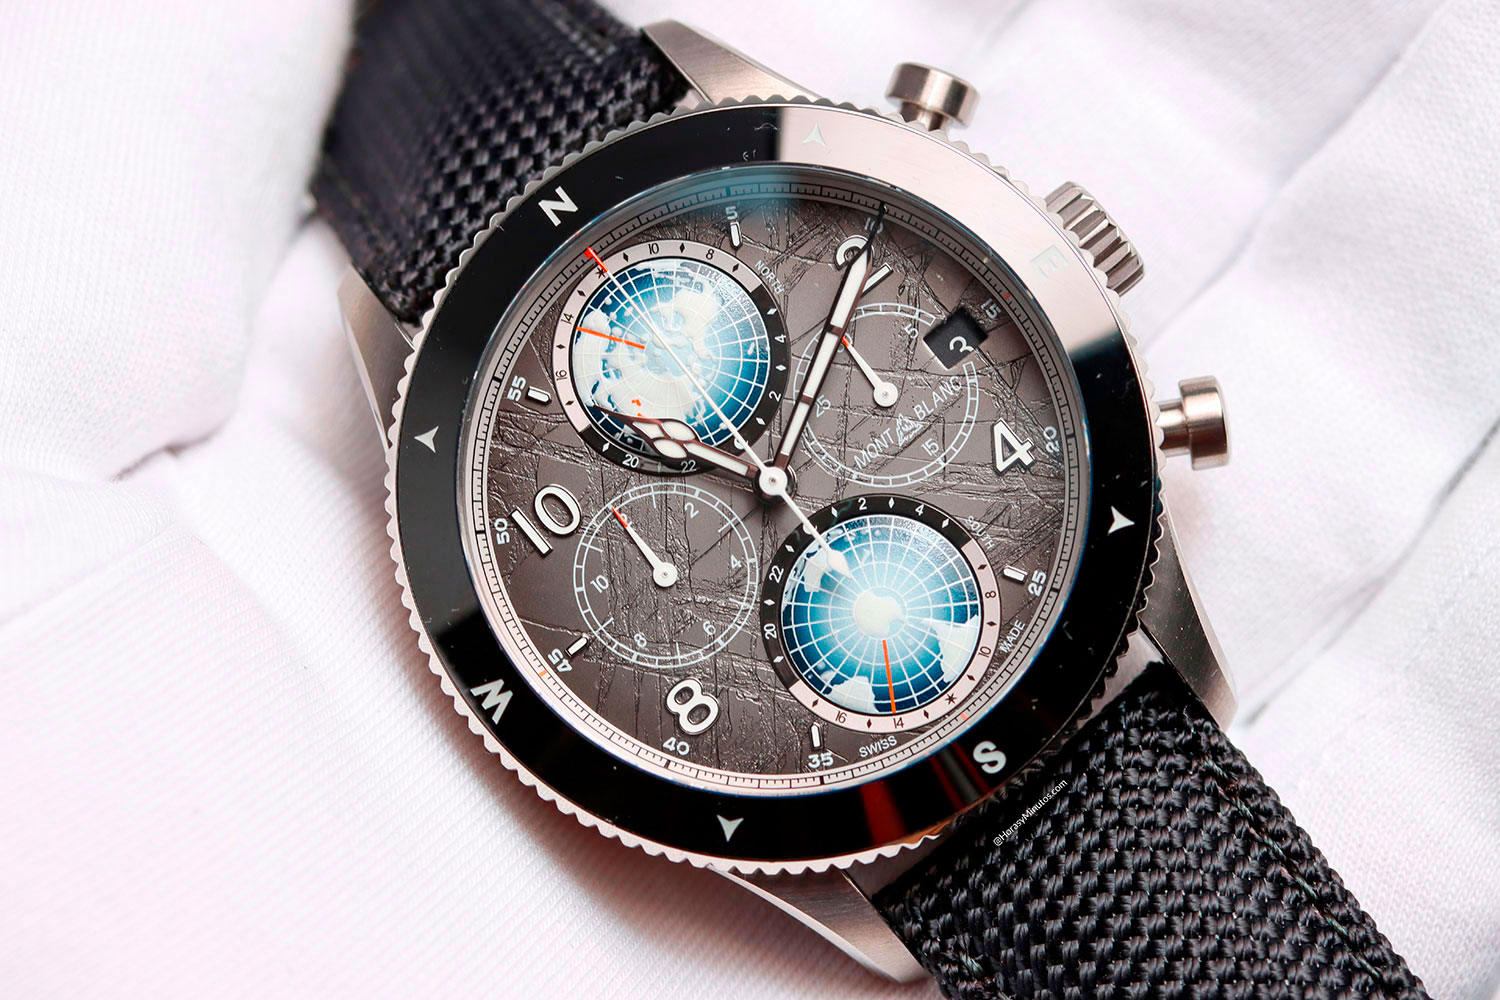 Montblanc 1858 Geosphere Chronograph 0 Oxygen The 8000 Limited Edition